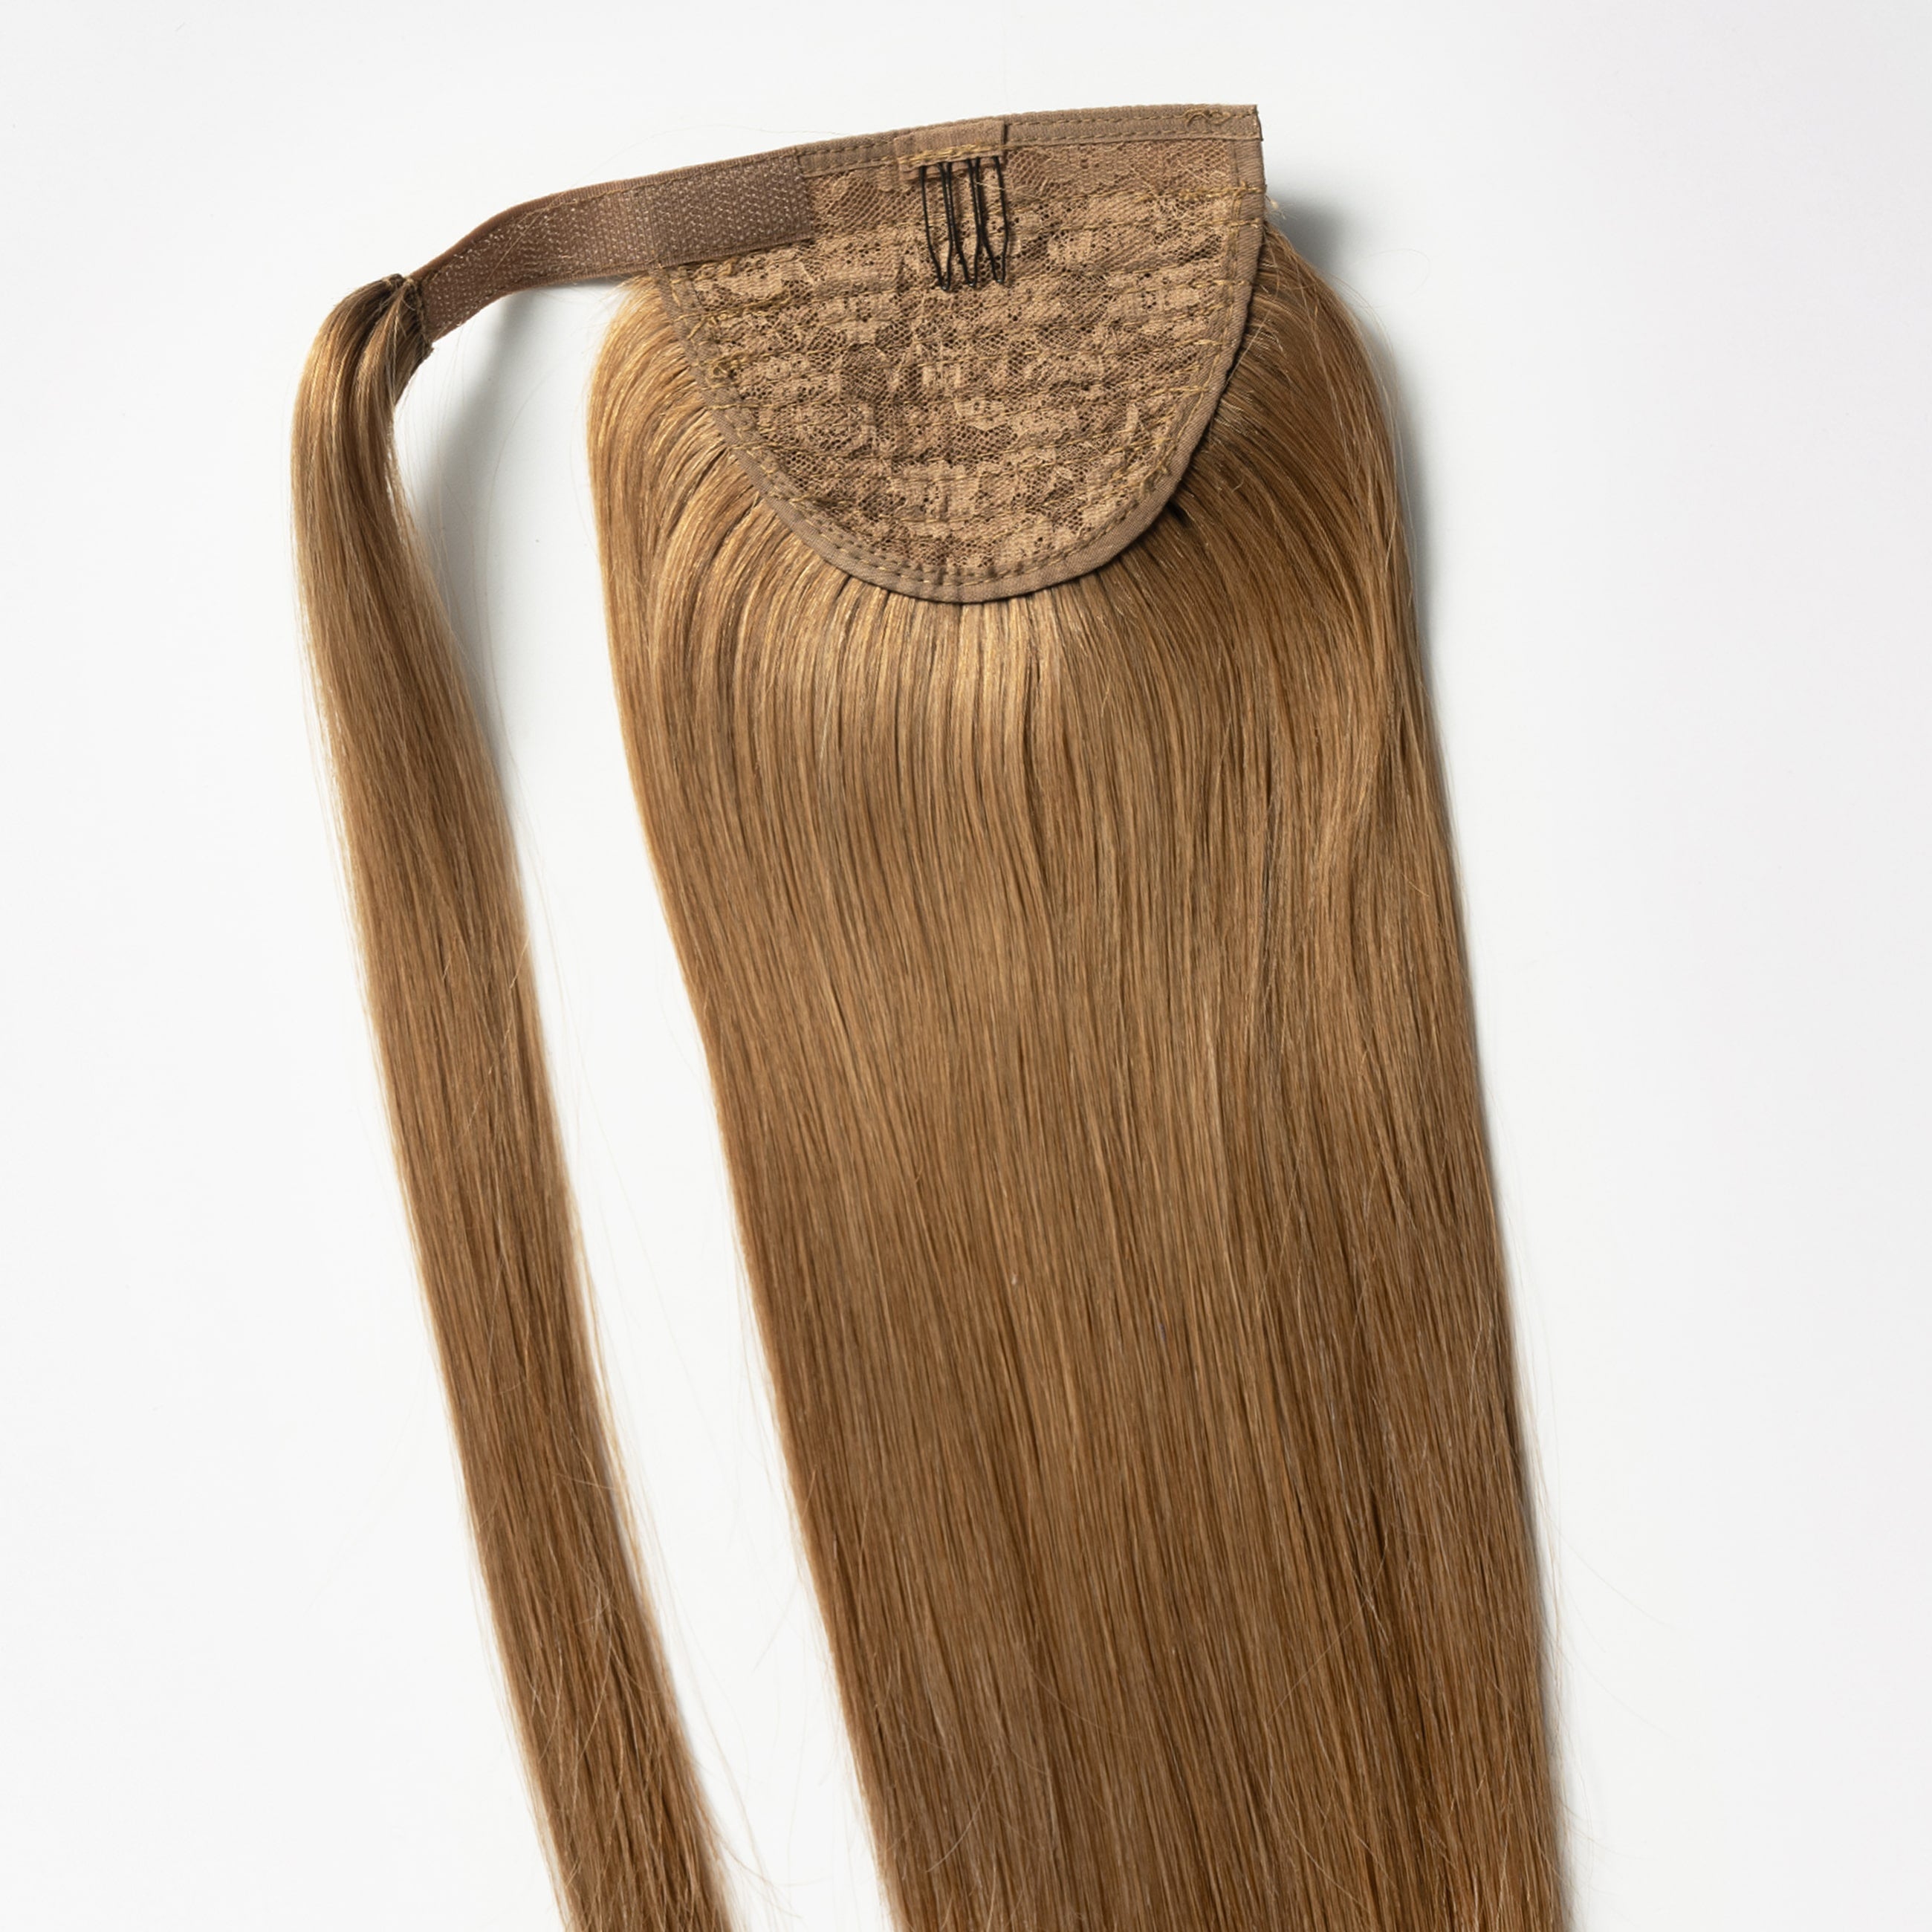 Ponytail extensions - Light Natural Brown 5